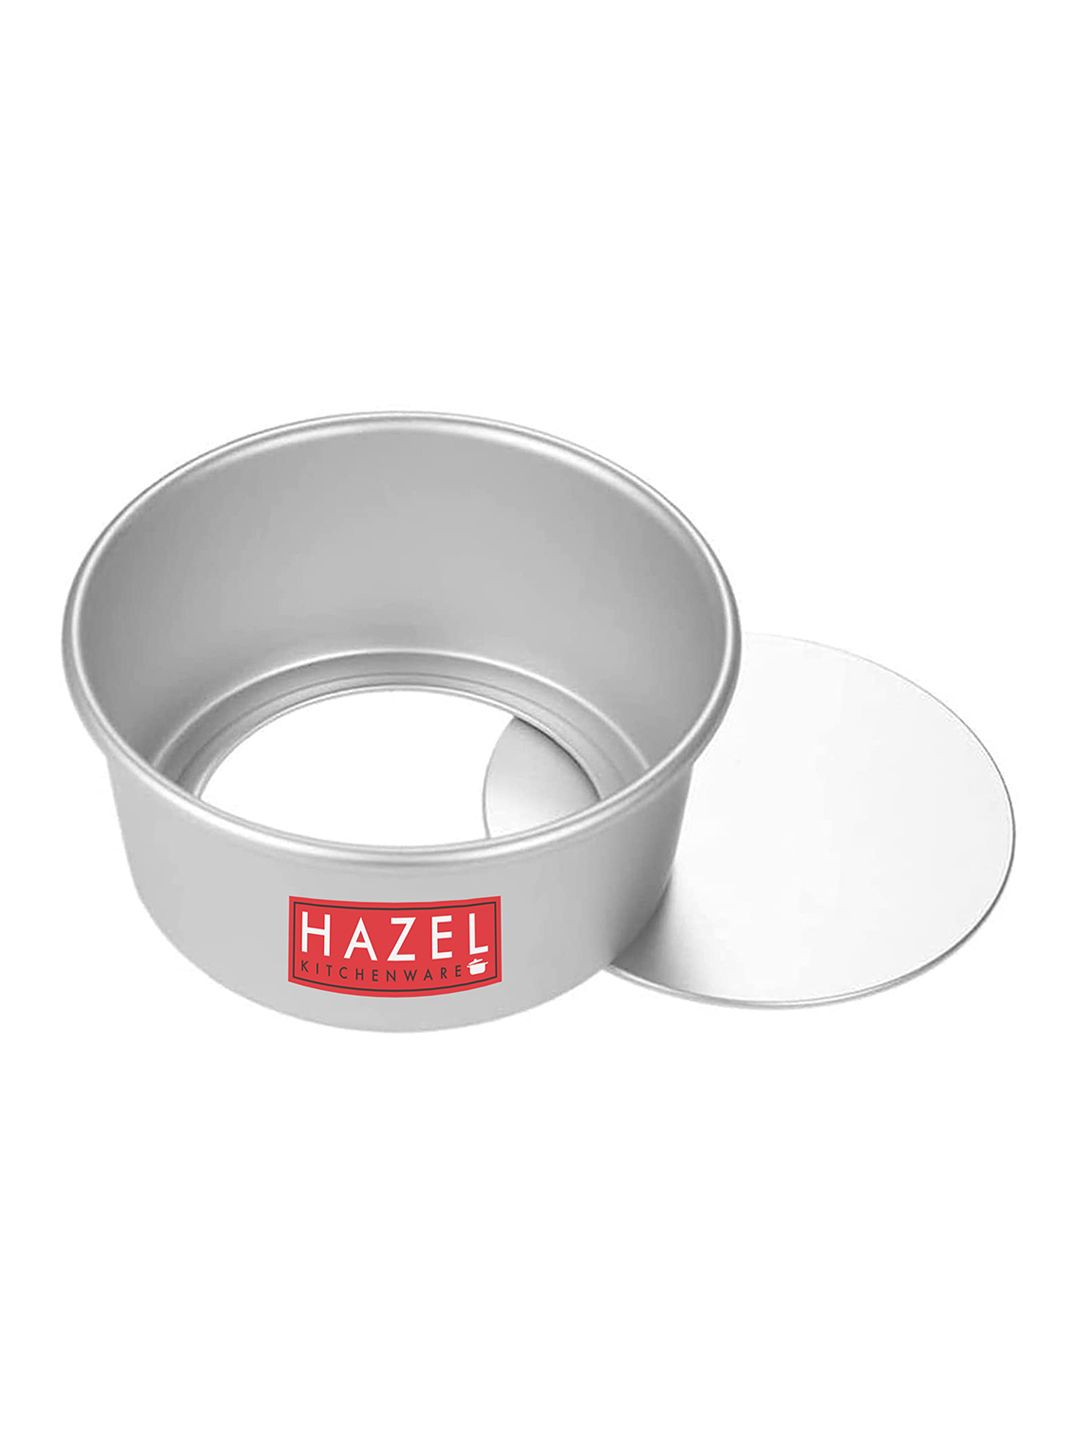 HAZEL Silver-Toned Aluminum Detachable Cake Mould Price in India